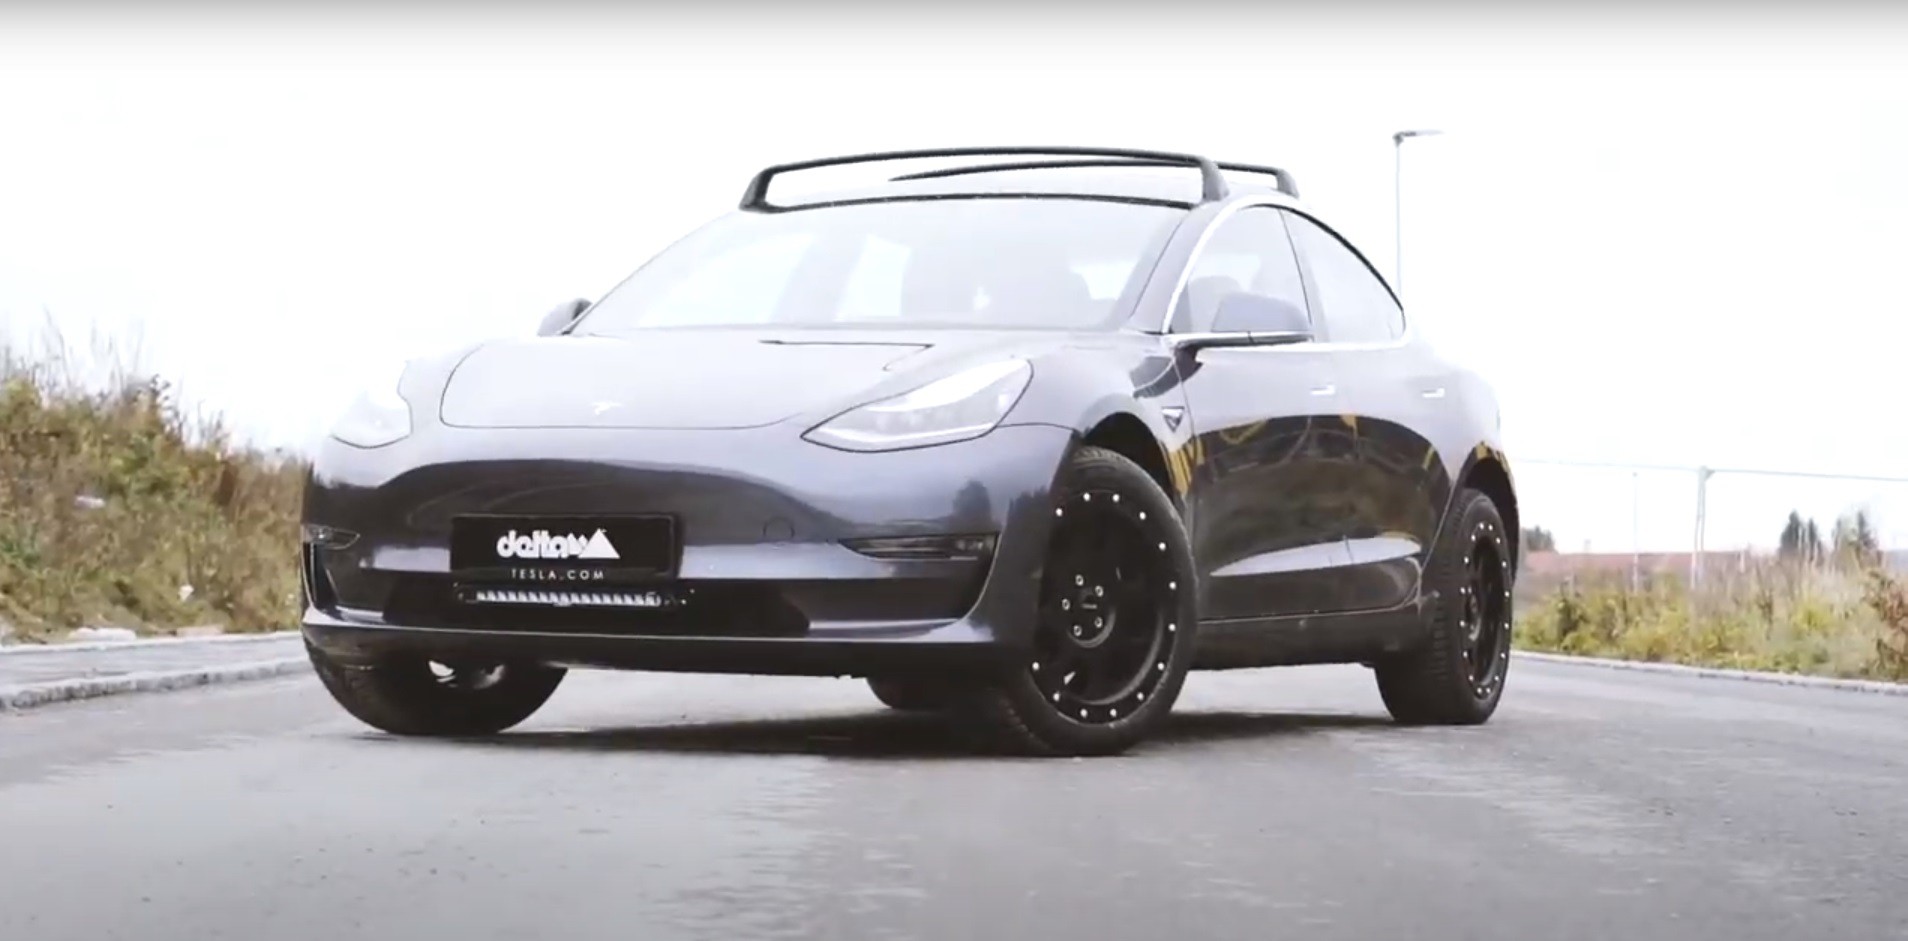 Tesla Model 3 Off-Road Pack Created to Tackle Norway's Wilderness